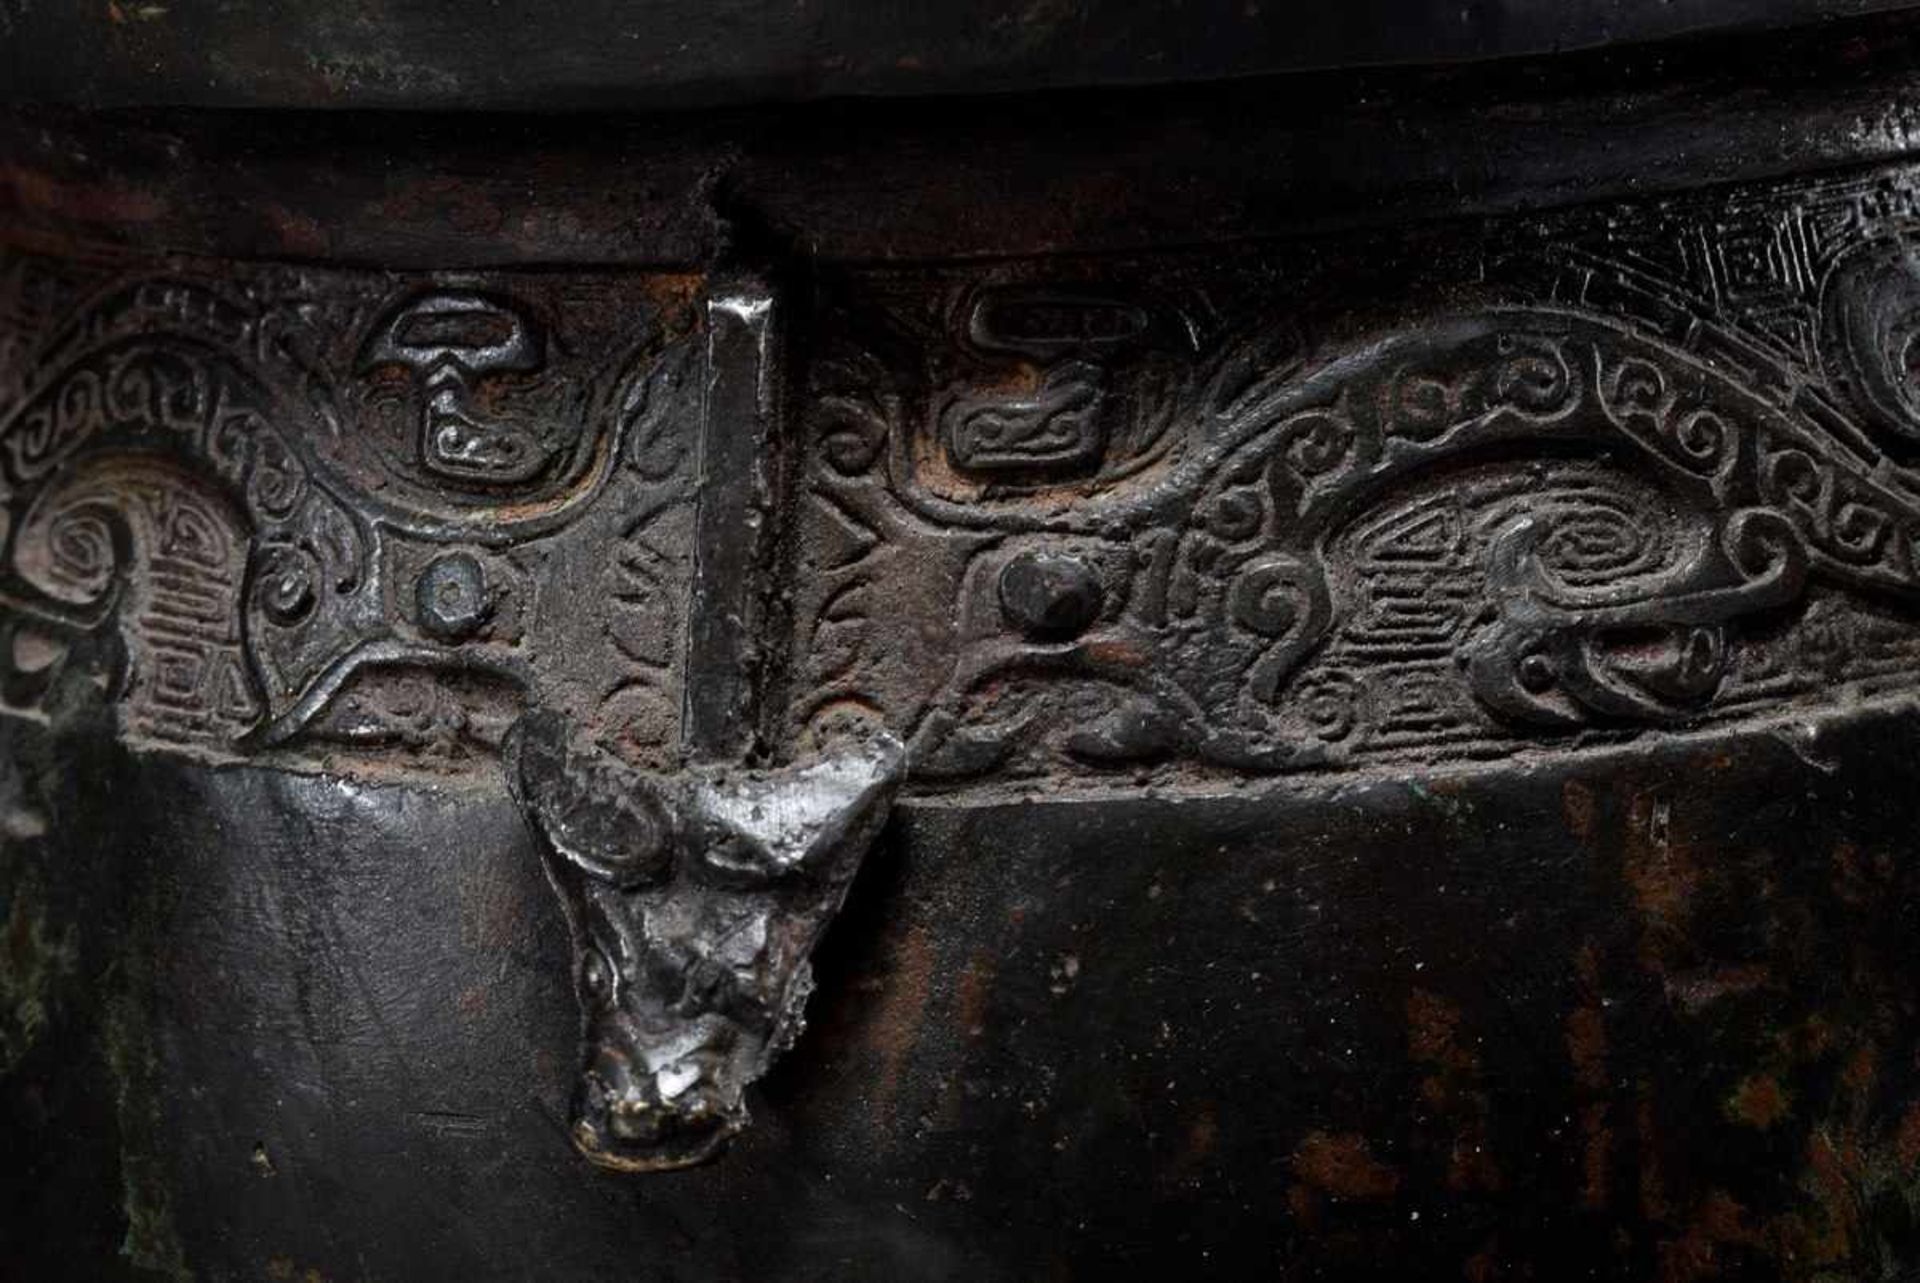 Bronze ritual vessel of the type "Ding" with archaic ornamental frieze on 3 legs, China 18th/19th - Bild 4 aus 10